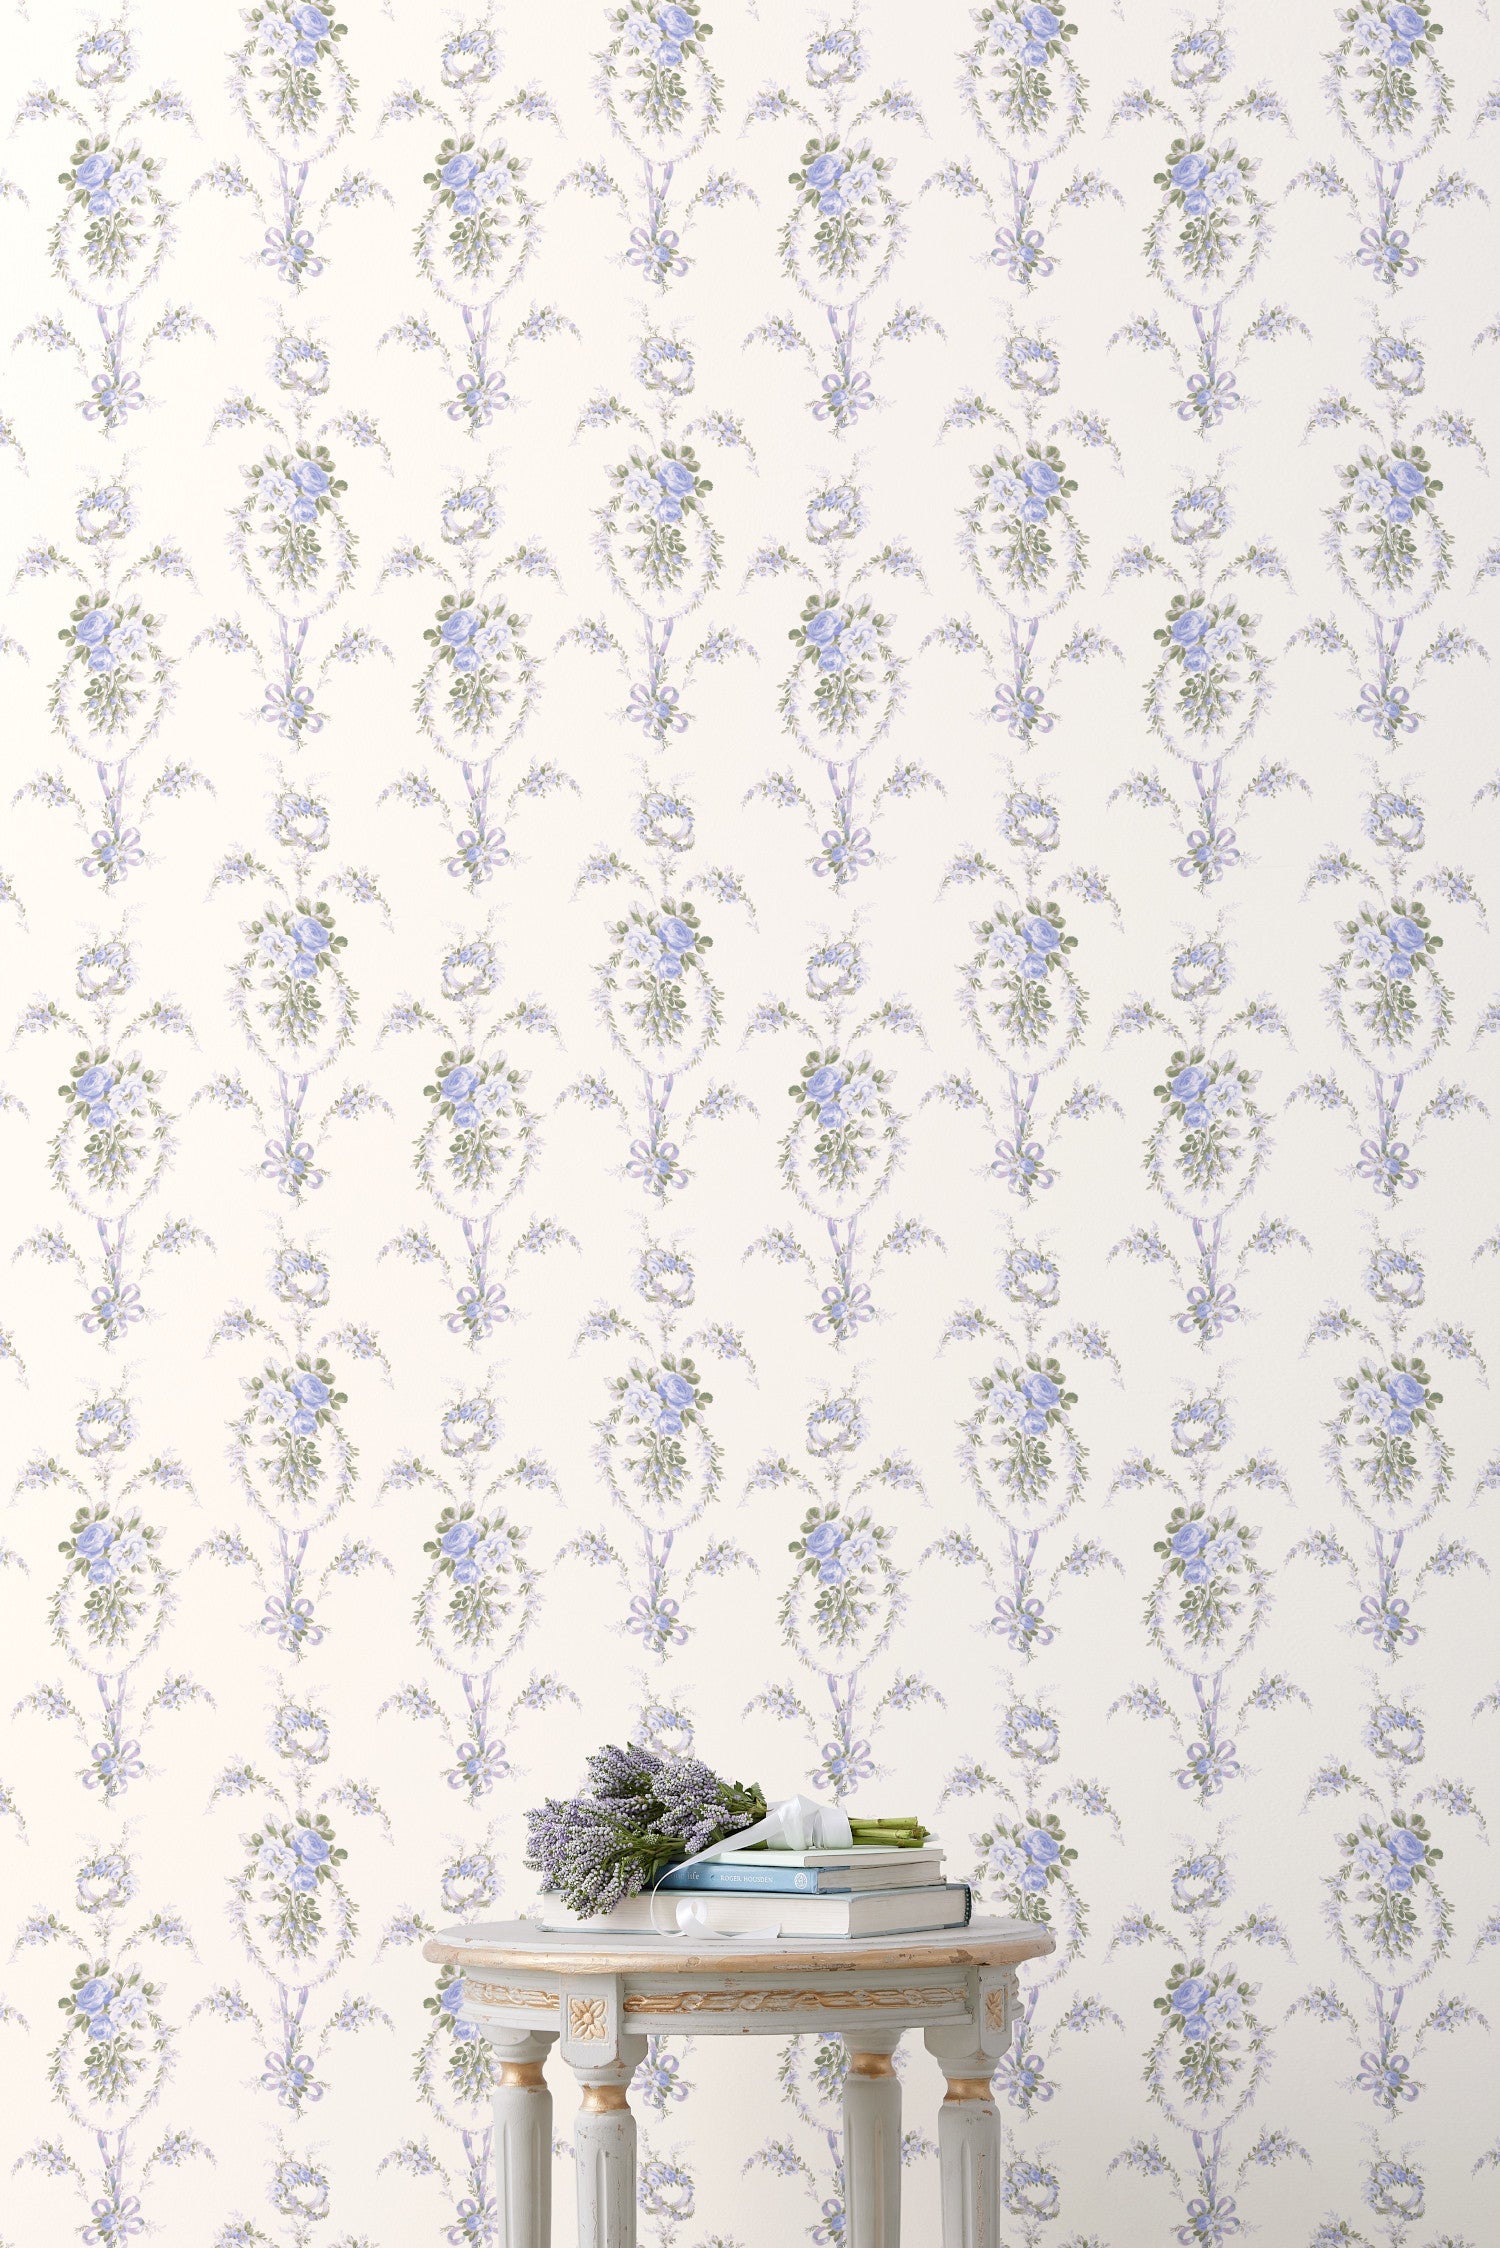 A Lavender and blue rose bouquet wallpaper against a soft antique white background